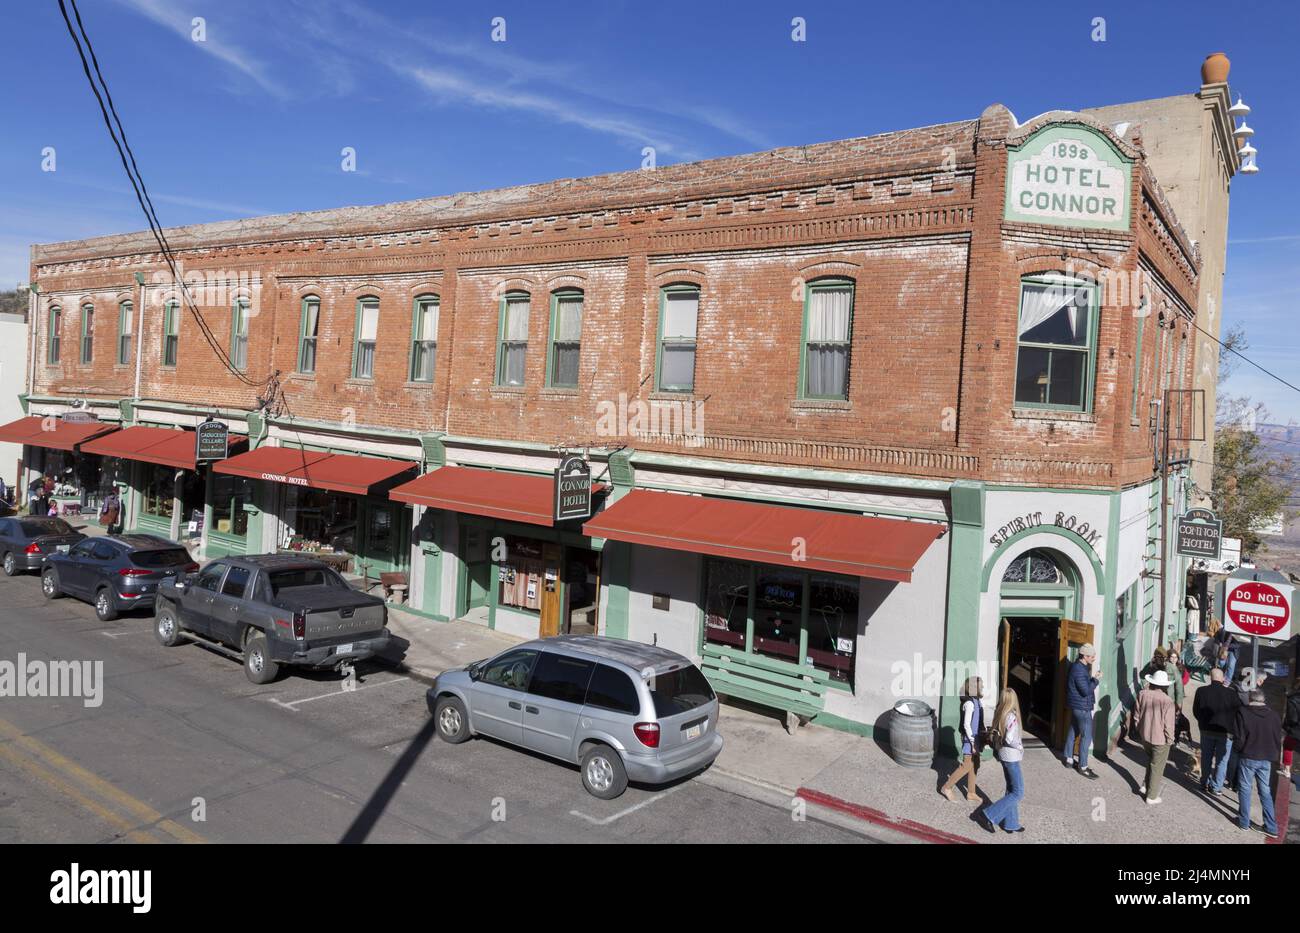 Historic Connor Hotel on Jerome Arizona Main Street, built in 1898 and one of finest lodging establishments in the booming mining towns of the West Stock Photo